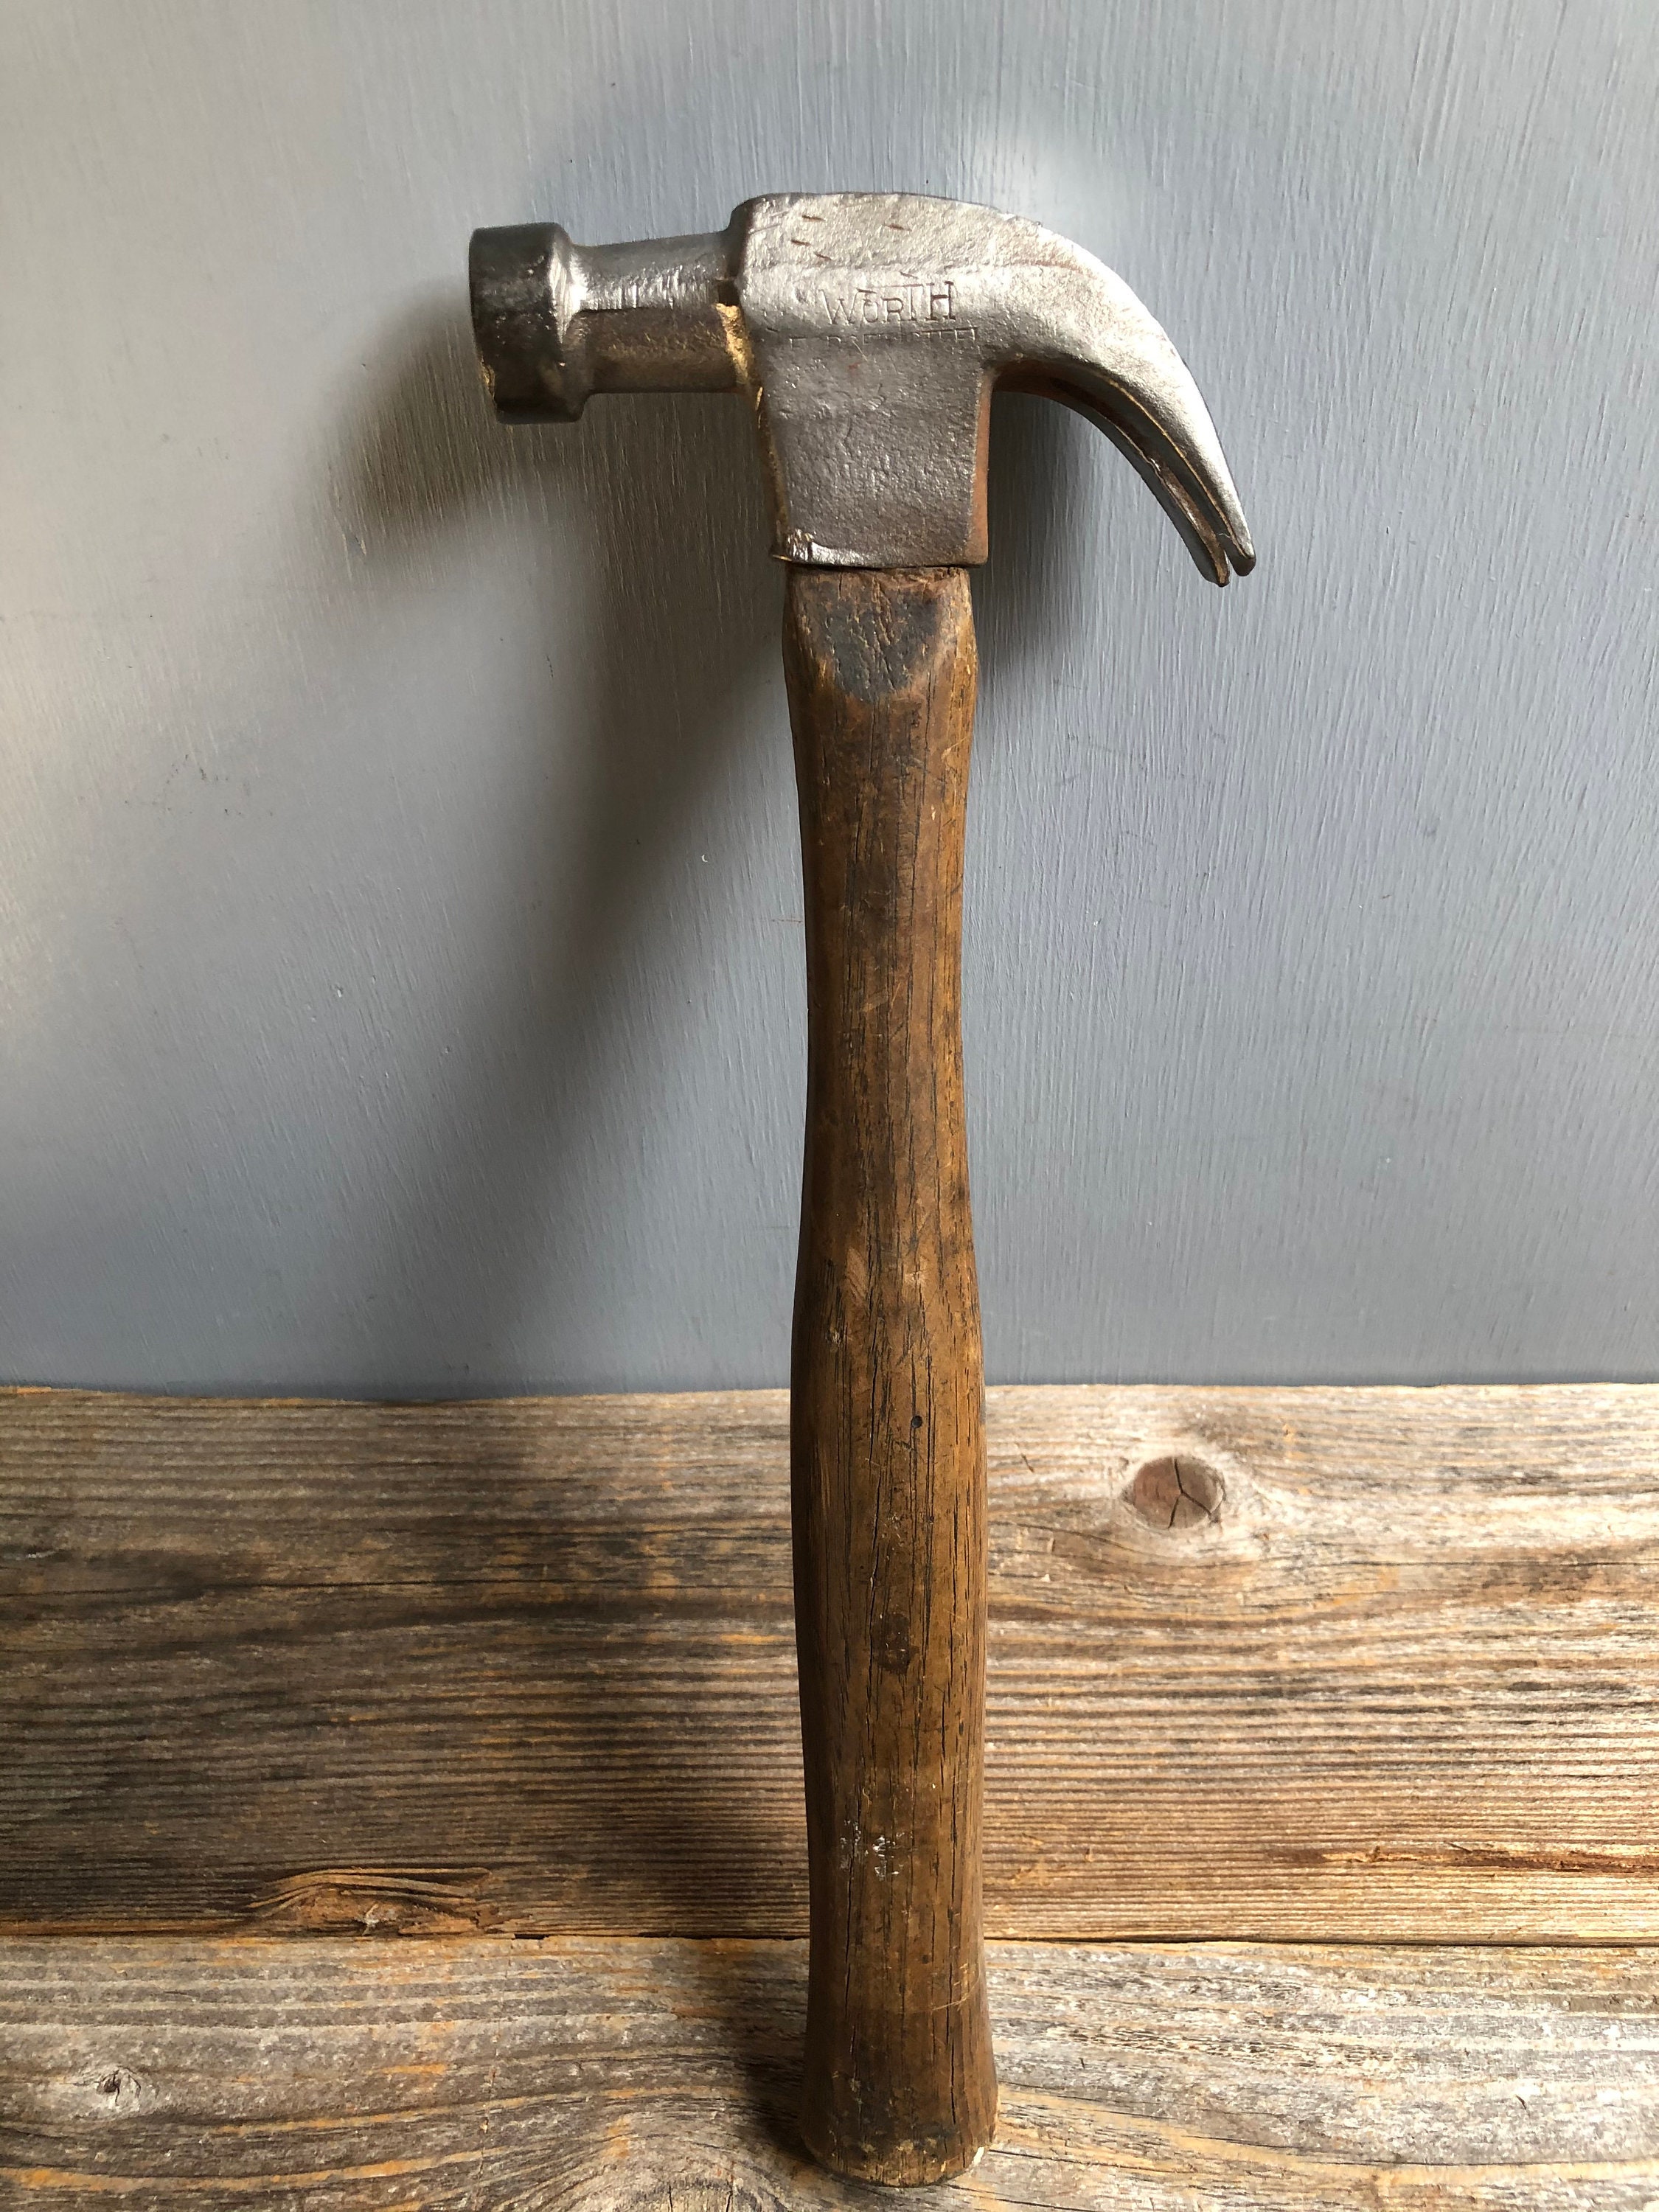 Vintage Worth Forged Steel Claw Hammer, Claw Hammer, Antique Claw Hammer,  Wood Handled Claw Hammer, Hammer, Old Tools, Worth Co, USA -  Canada